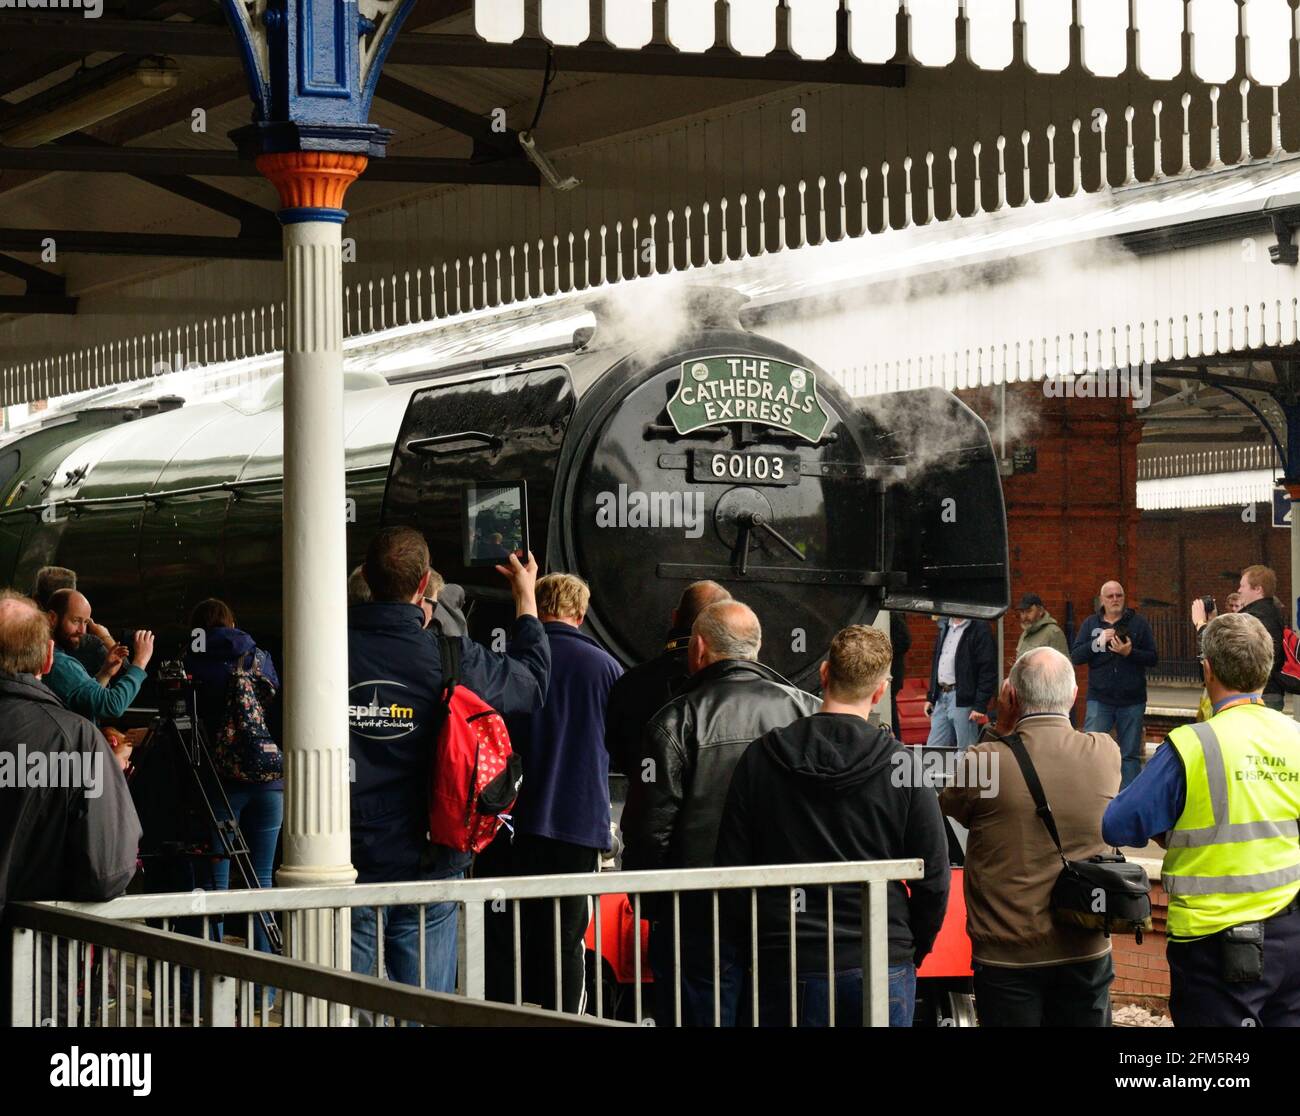 Despite the rain, steam locomotive Flying Scotsman is surrounded by crowds at Salisbury station after arriving with the Cathedrals Express. 21.05.2016. Stock Photo